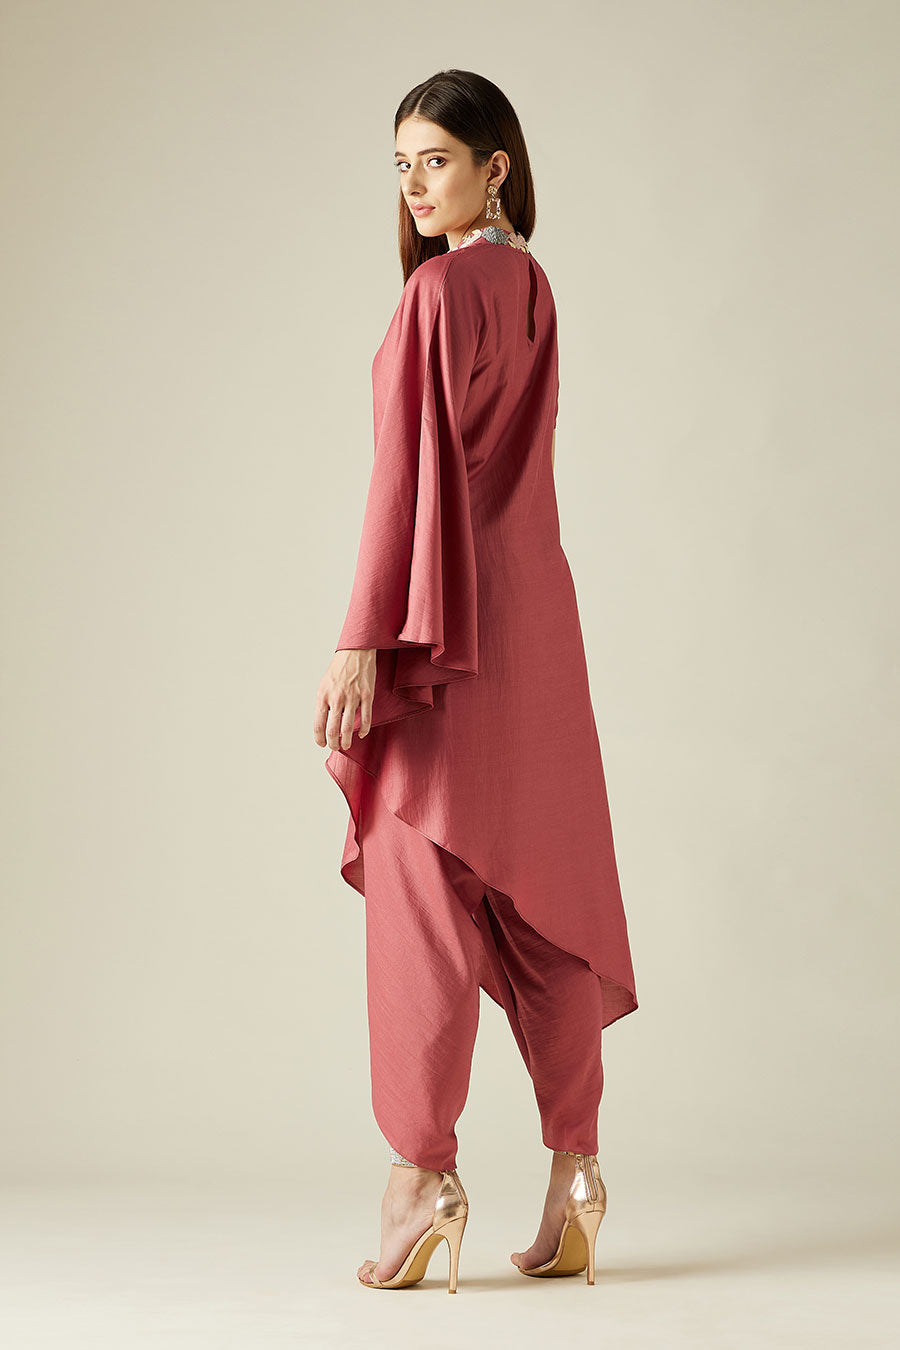 Garden Pink Tunic & Pant Co-Ord Set